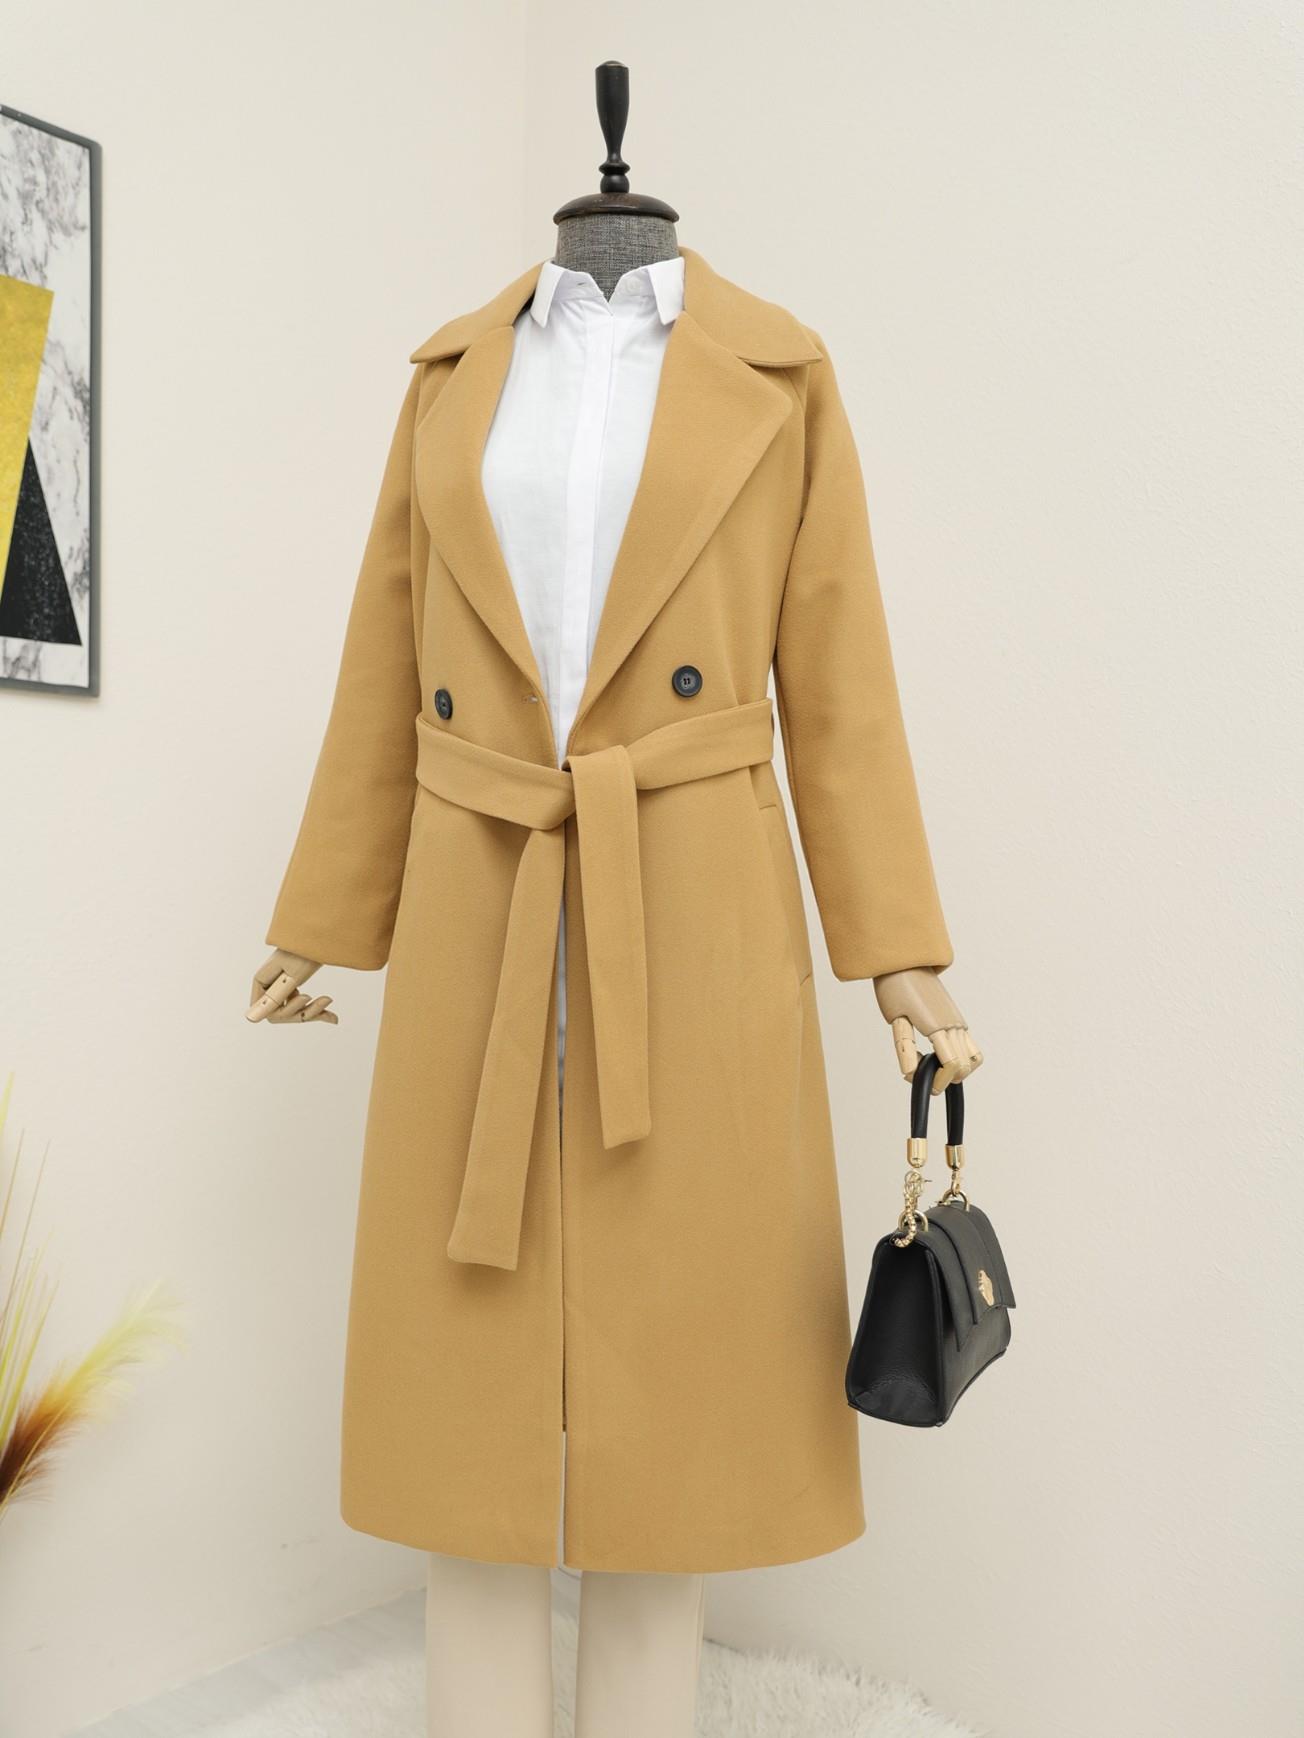 Arched Lined Stamping fabric Coat    -Mink